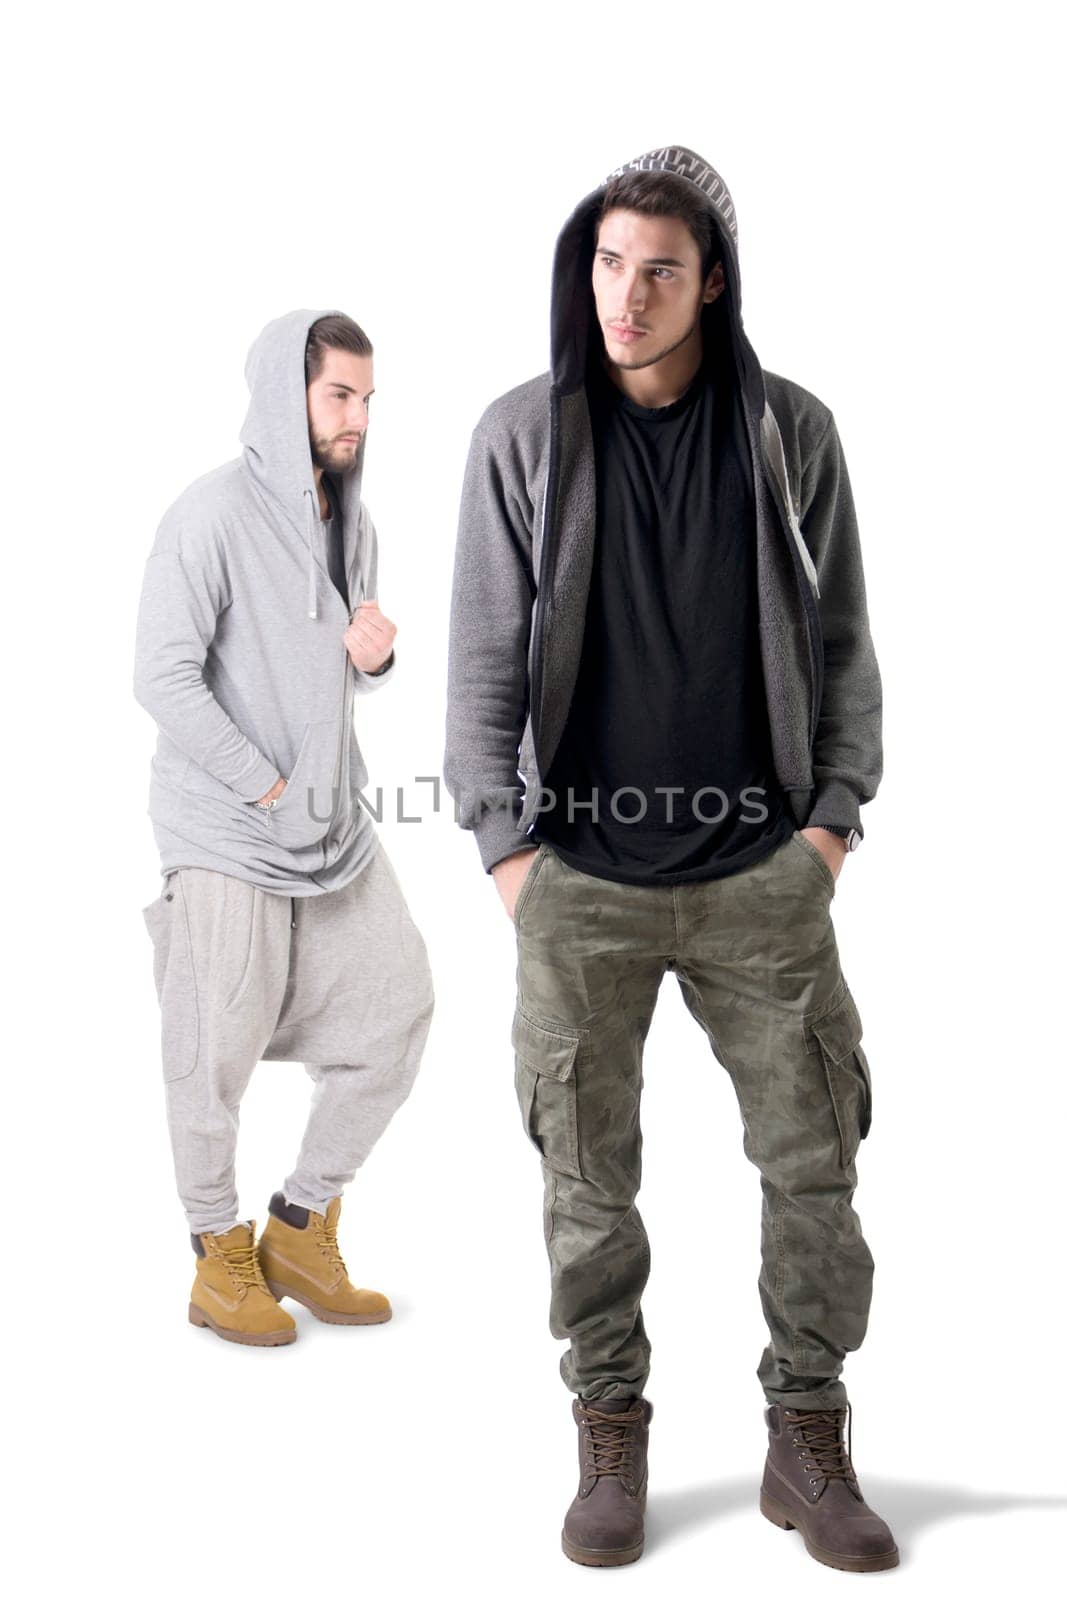 Photo of two men posing together against a blank backdrop by artofphoto